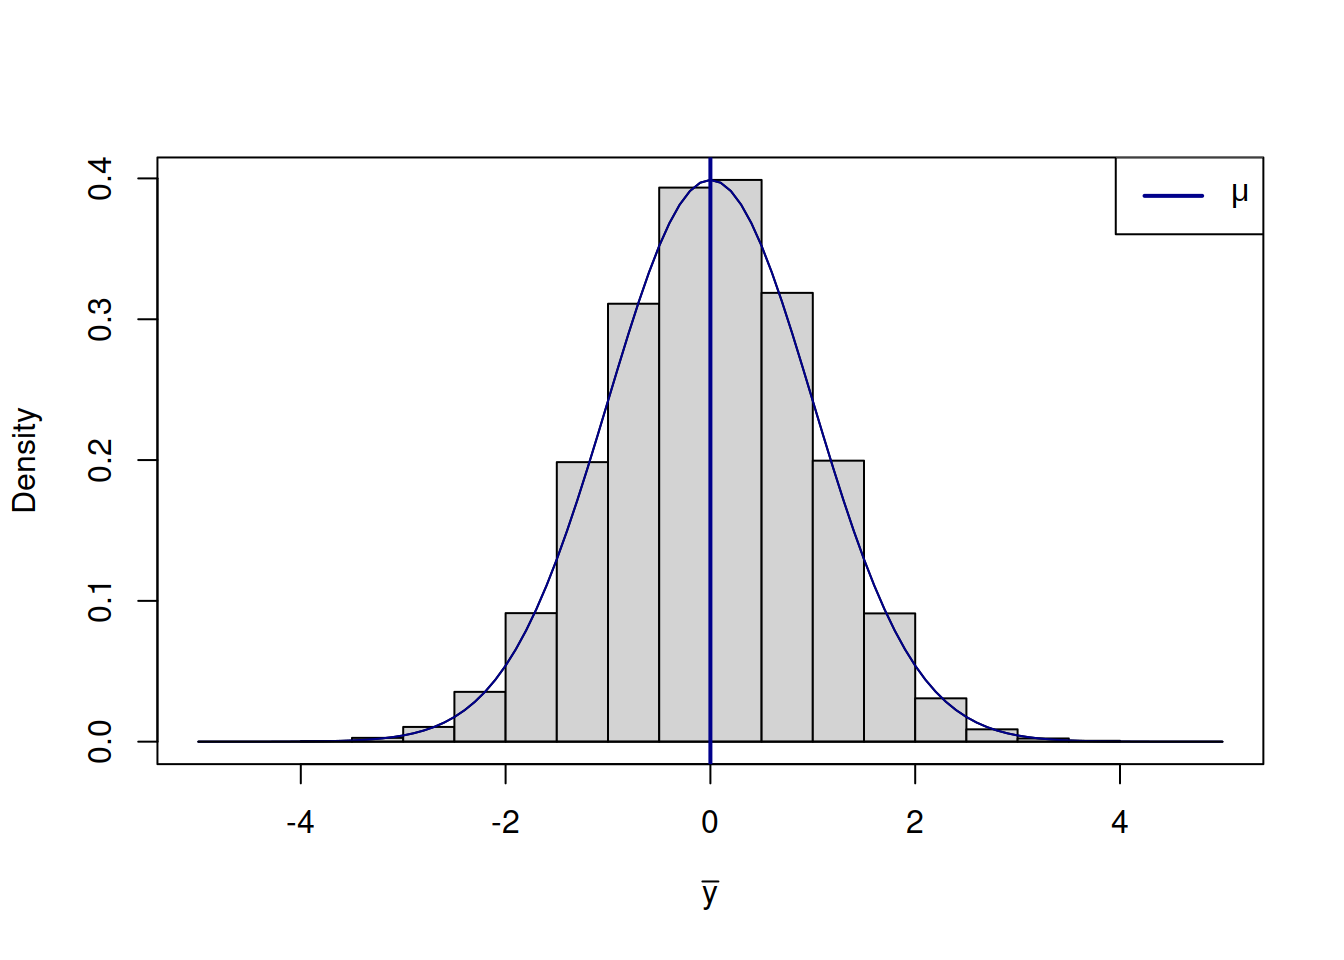 Distribution of the sample mean.